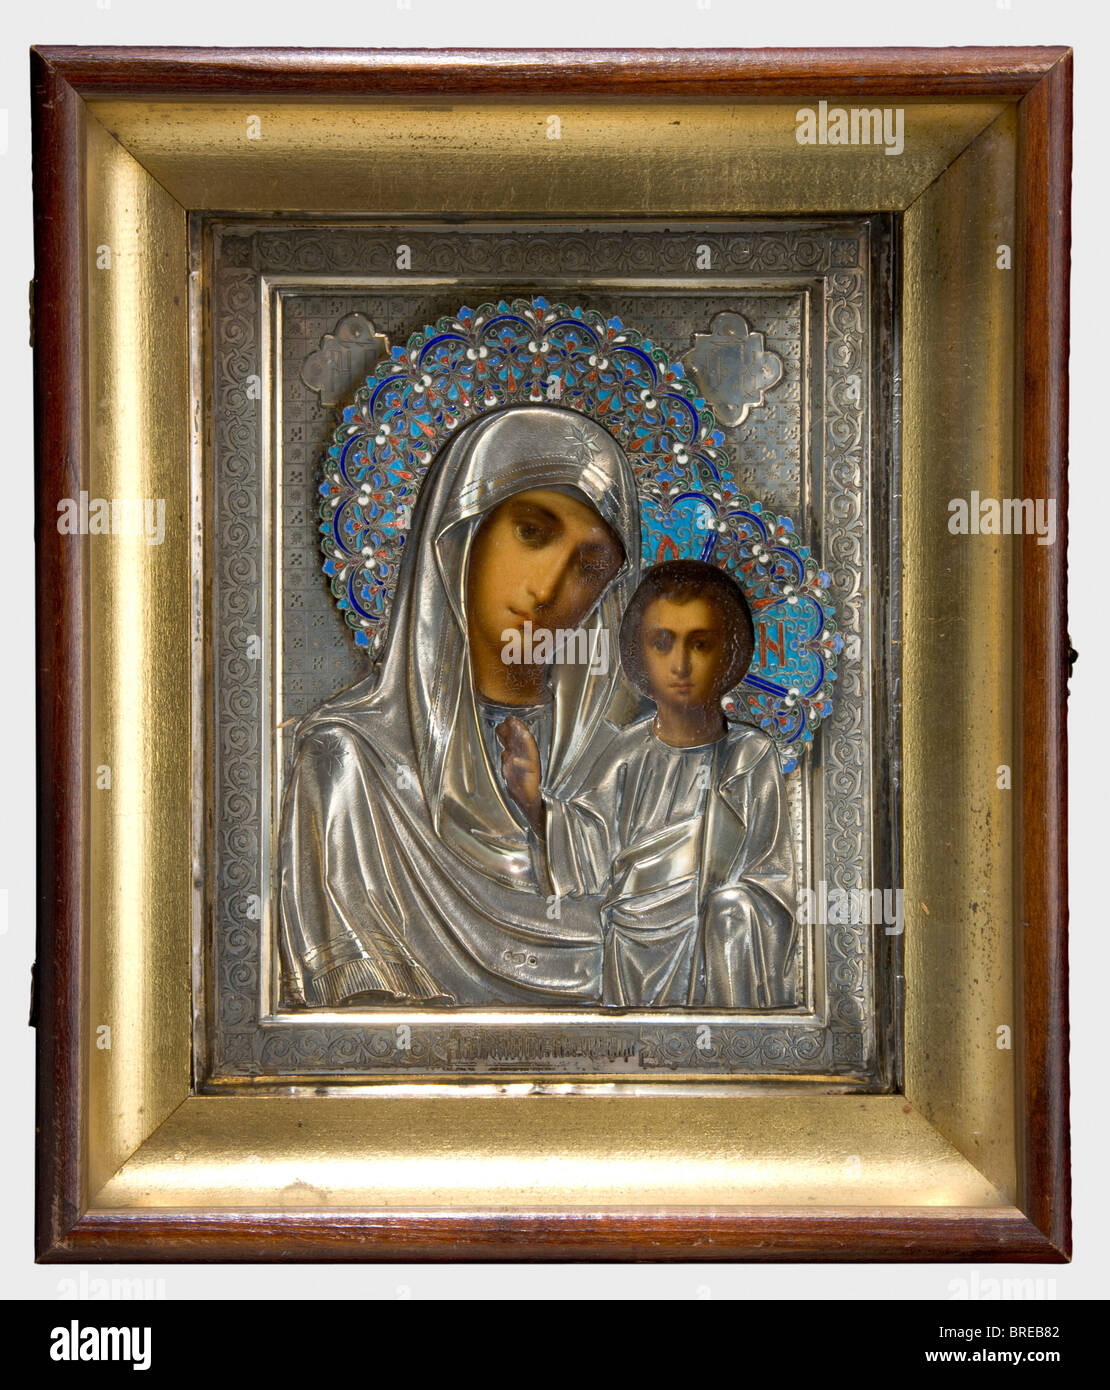 An icon of the Virgin Mary of Kazan, ca. 1900 Beautiful painting. Finely chased and engraved icon with silver oklad, sunburst with cloisonné enamel. Three illegible hallmarks ('88'?). In corresponding, partially gold-plated custom frame with hinged glass door. On the verso the inventory label 'H.V.v.W. G.v.R.' of the Duchess of Württemberg, Grand Duchess of Russia. Dimensions 28.5 x 24.5 cm. Provenance: Grand Duchess Vera Konstantinovna Romanova (1854 - 1912). historic, historical, people, 1900s, 20th century, 19th century, object, objects, stills, clipping, cl, Stock Photo